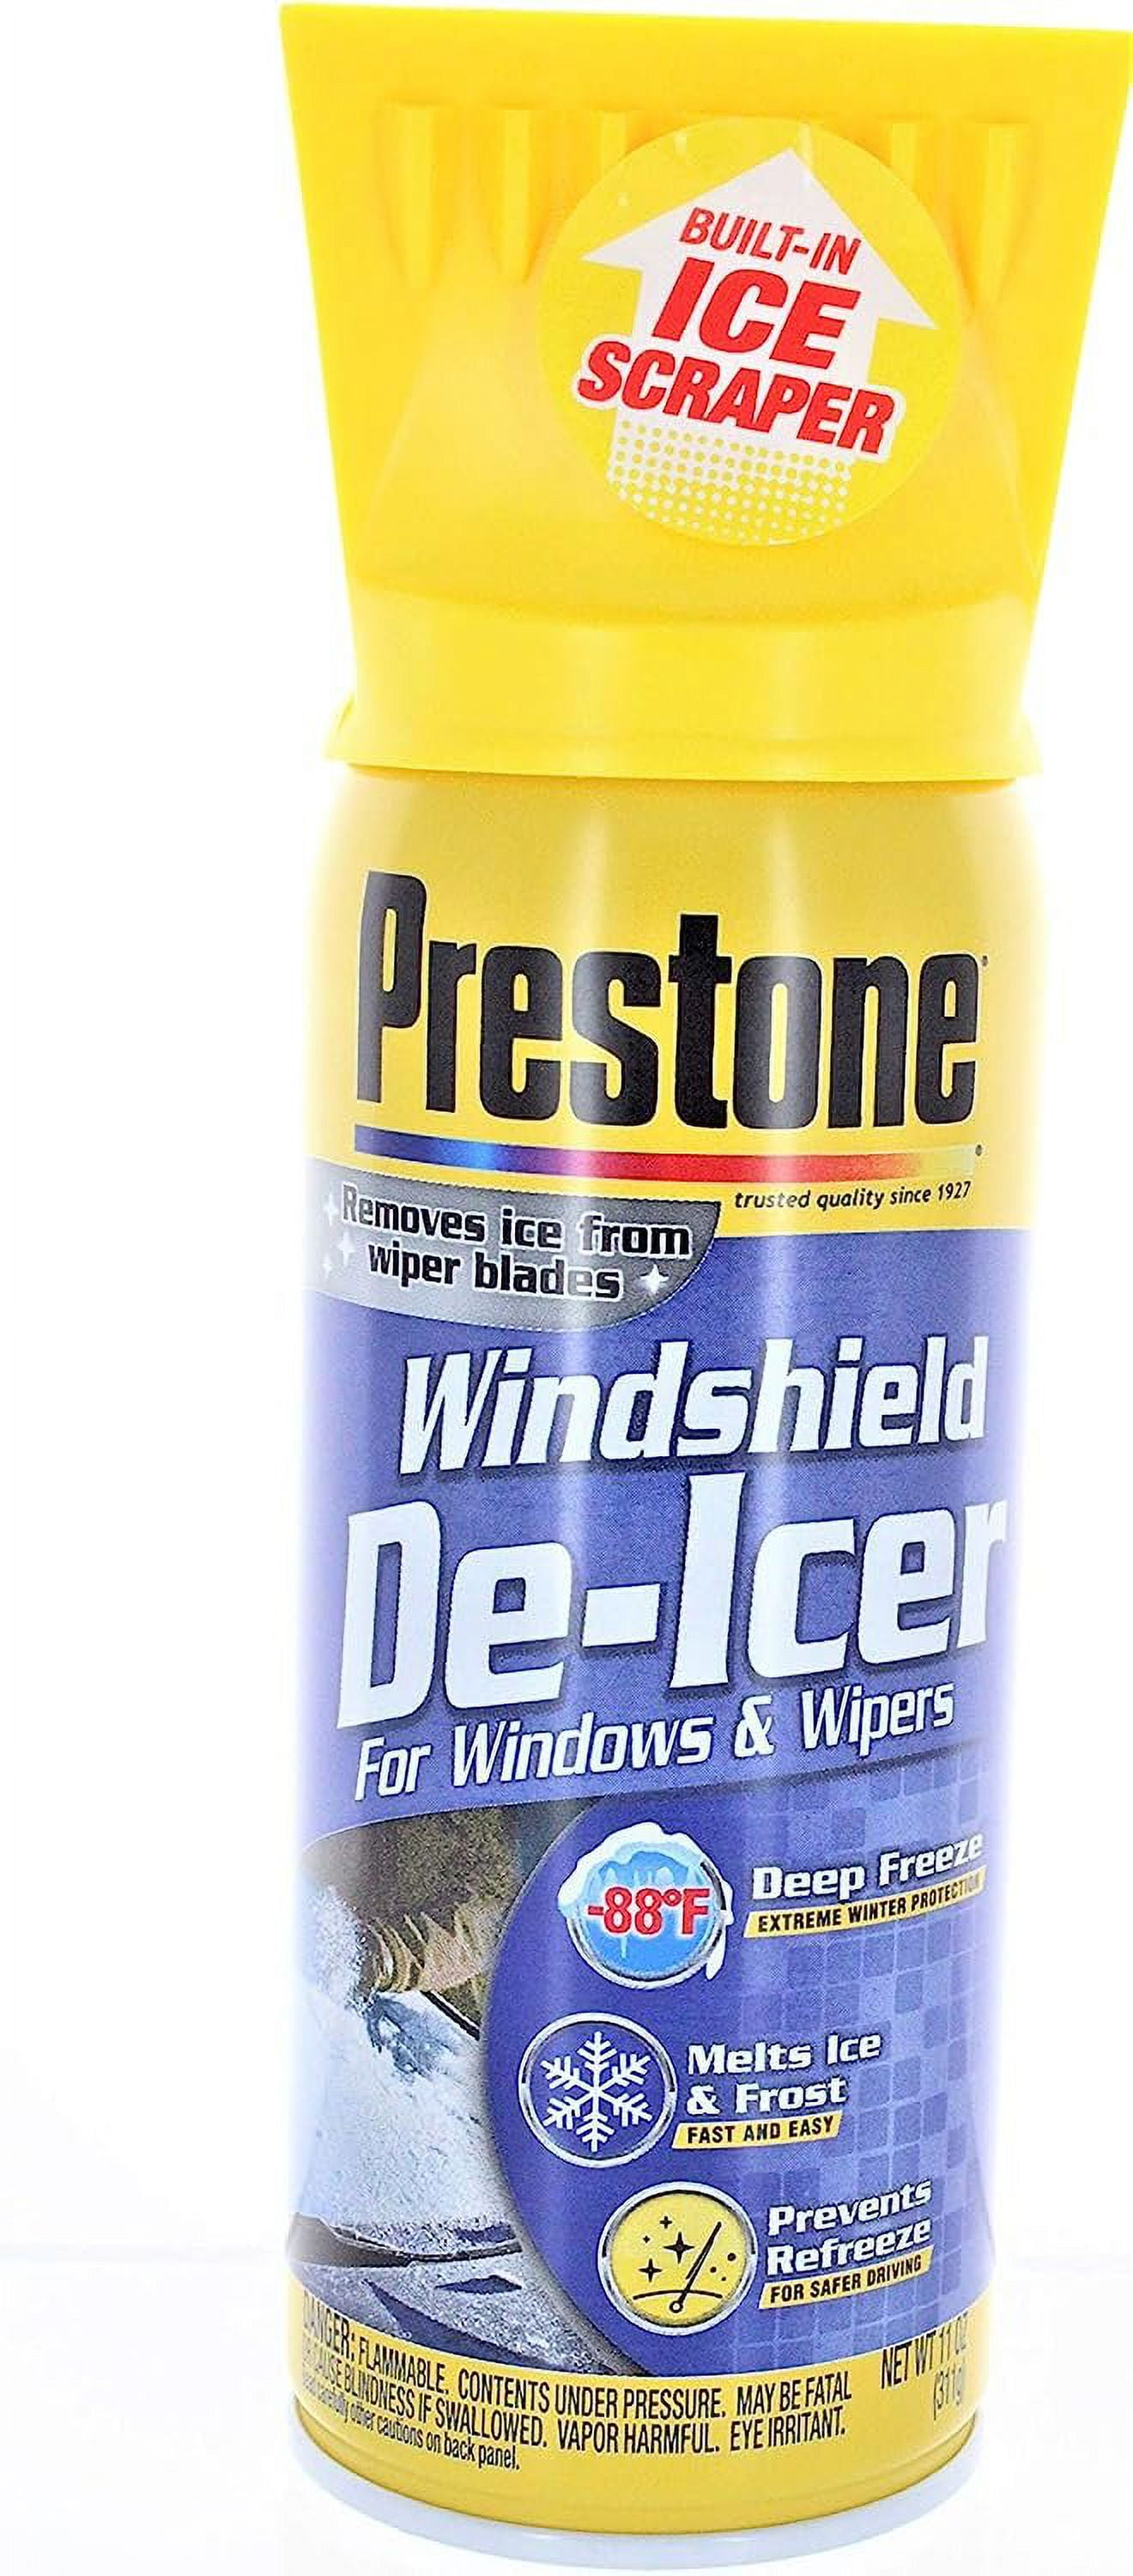 Prestone AS658-6PK Deluxe 3-in-1 Windshield Washer Fluid, 1 Gallon (Pack of  6)